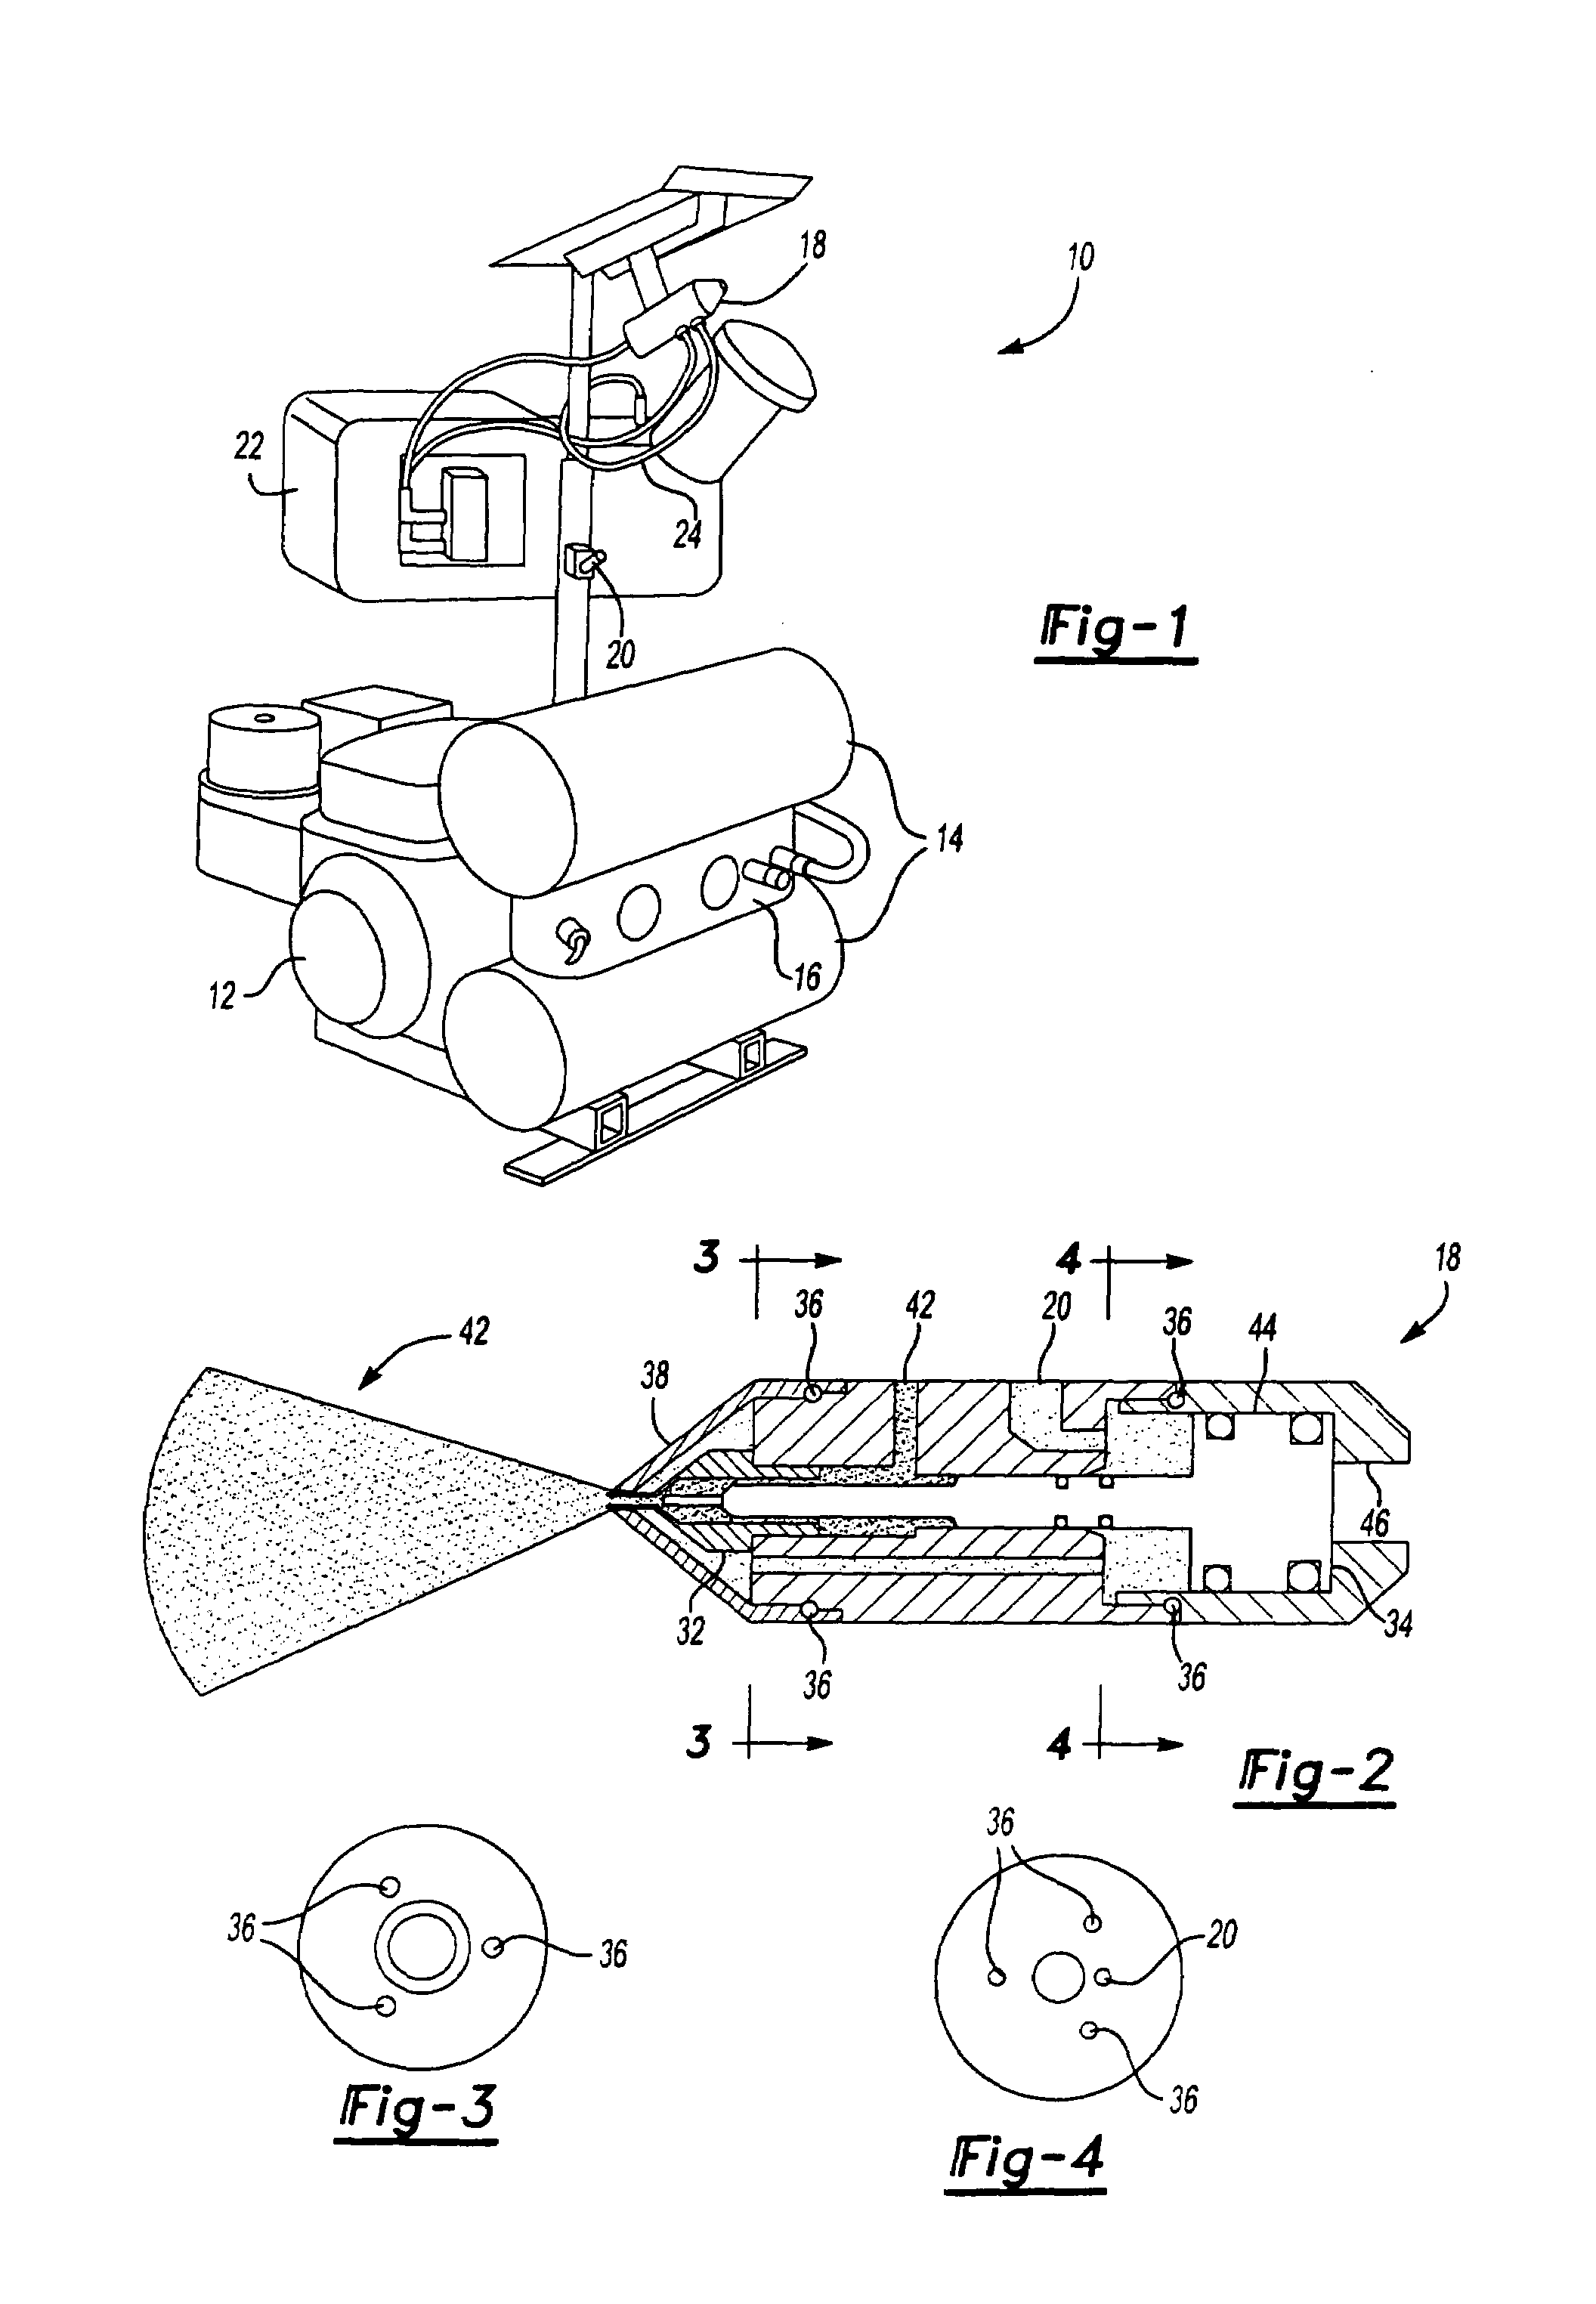 Spraying device system and method of dispersing and disseminating materials